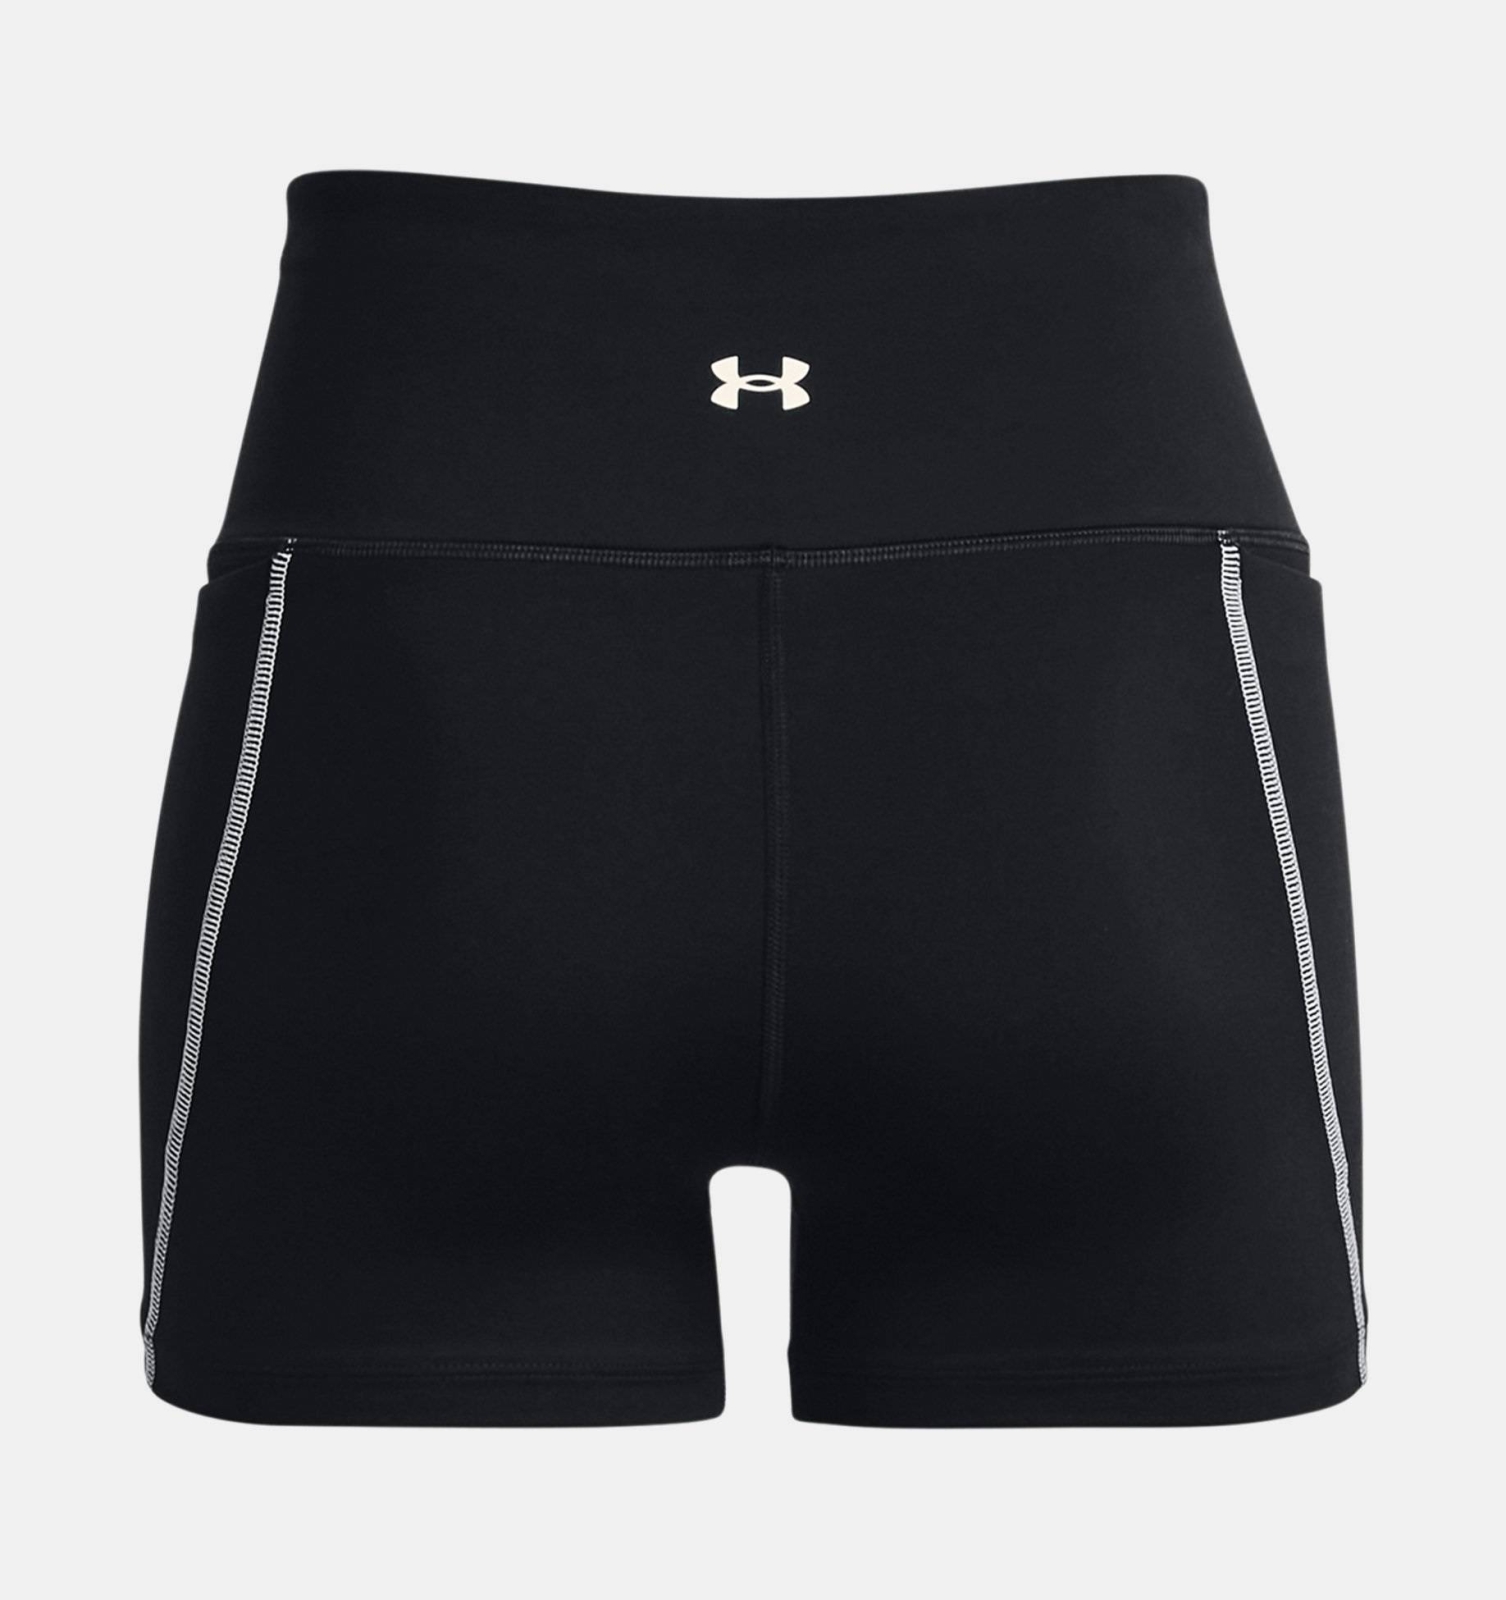 UNDER ARMOUR WOMENS PROJECT ROCK MERIDIAN SHORT